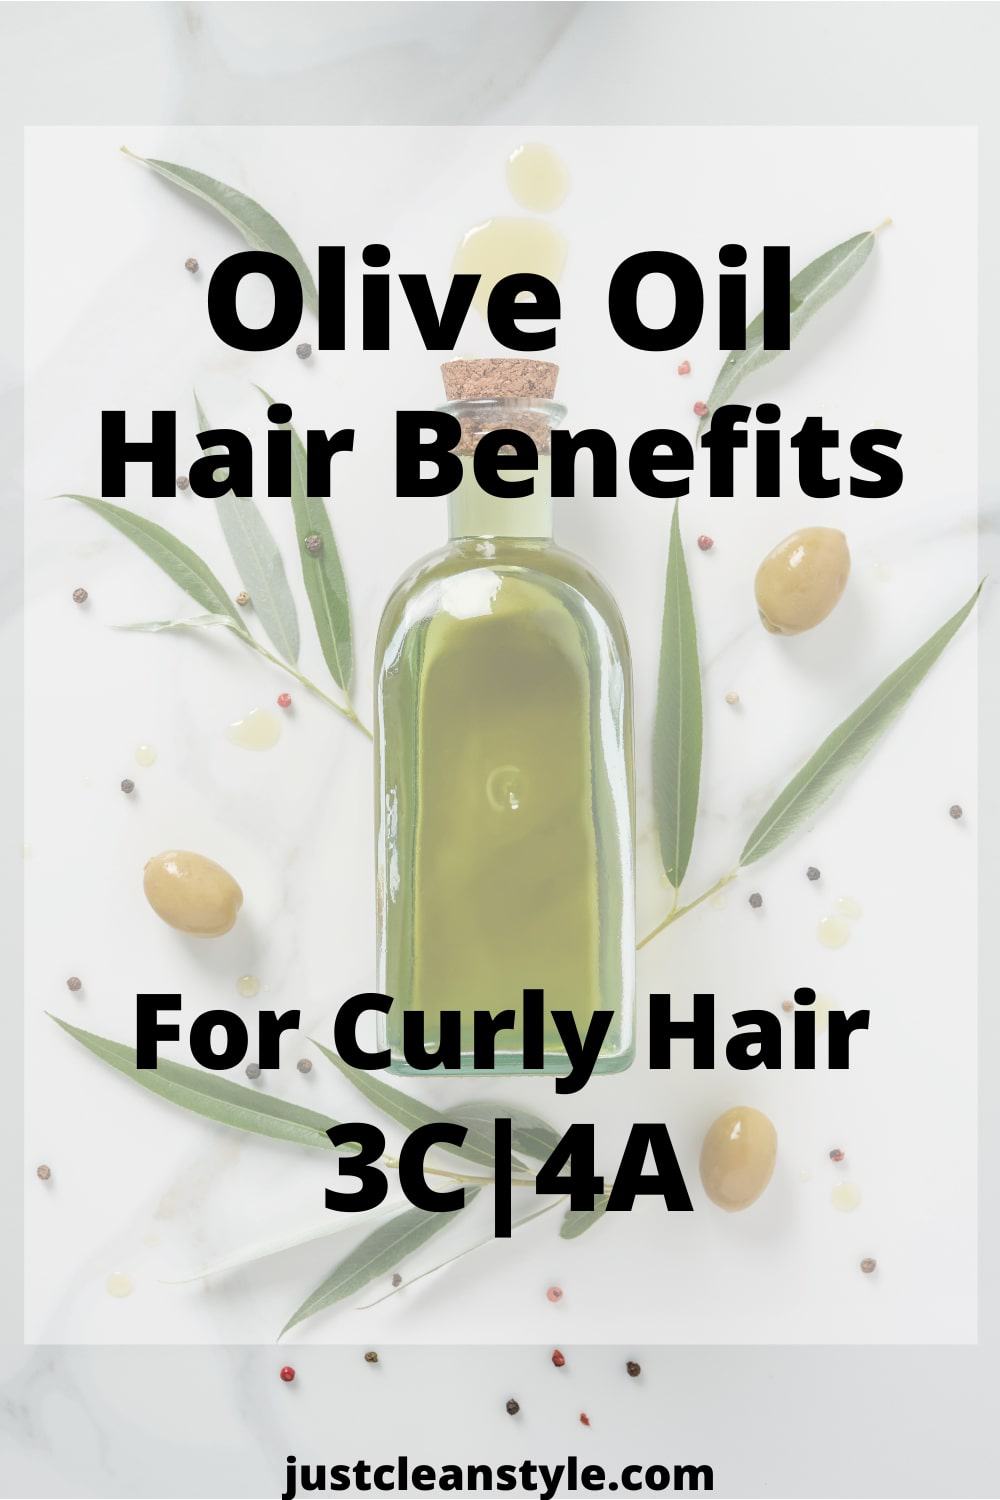 What No One Tells You About Olive Oil in Hair